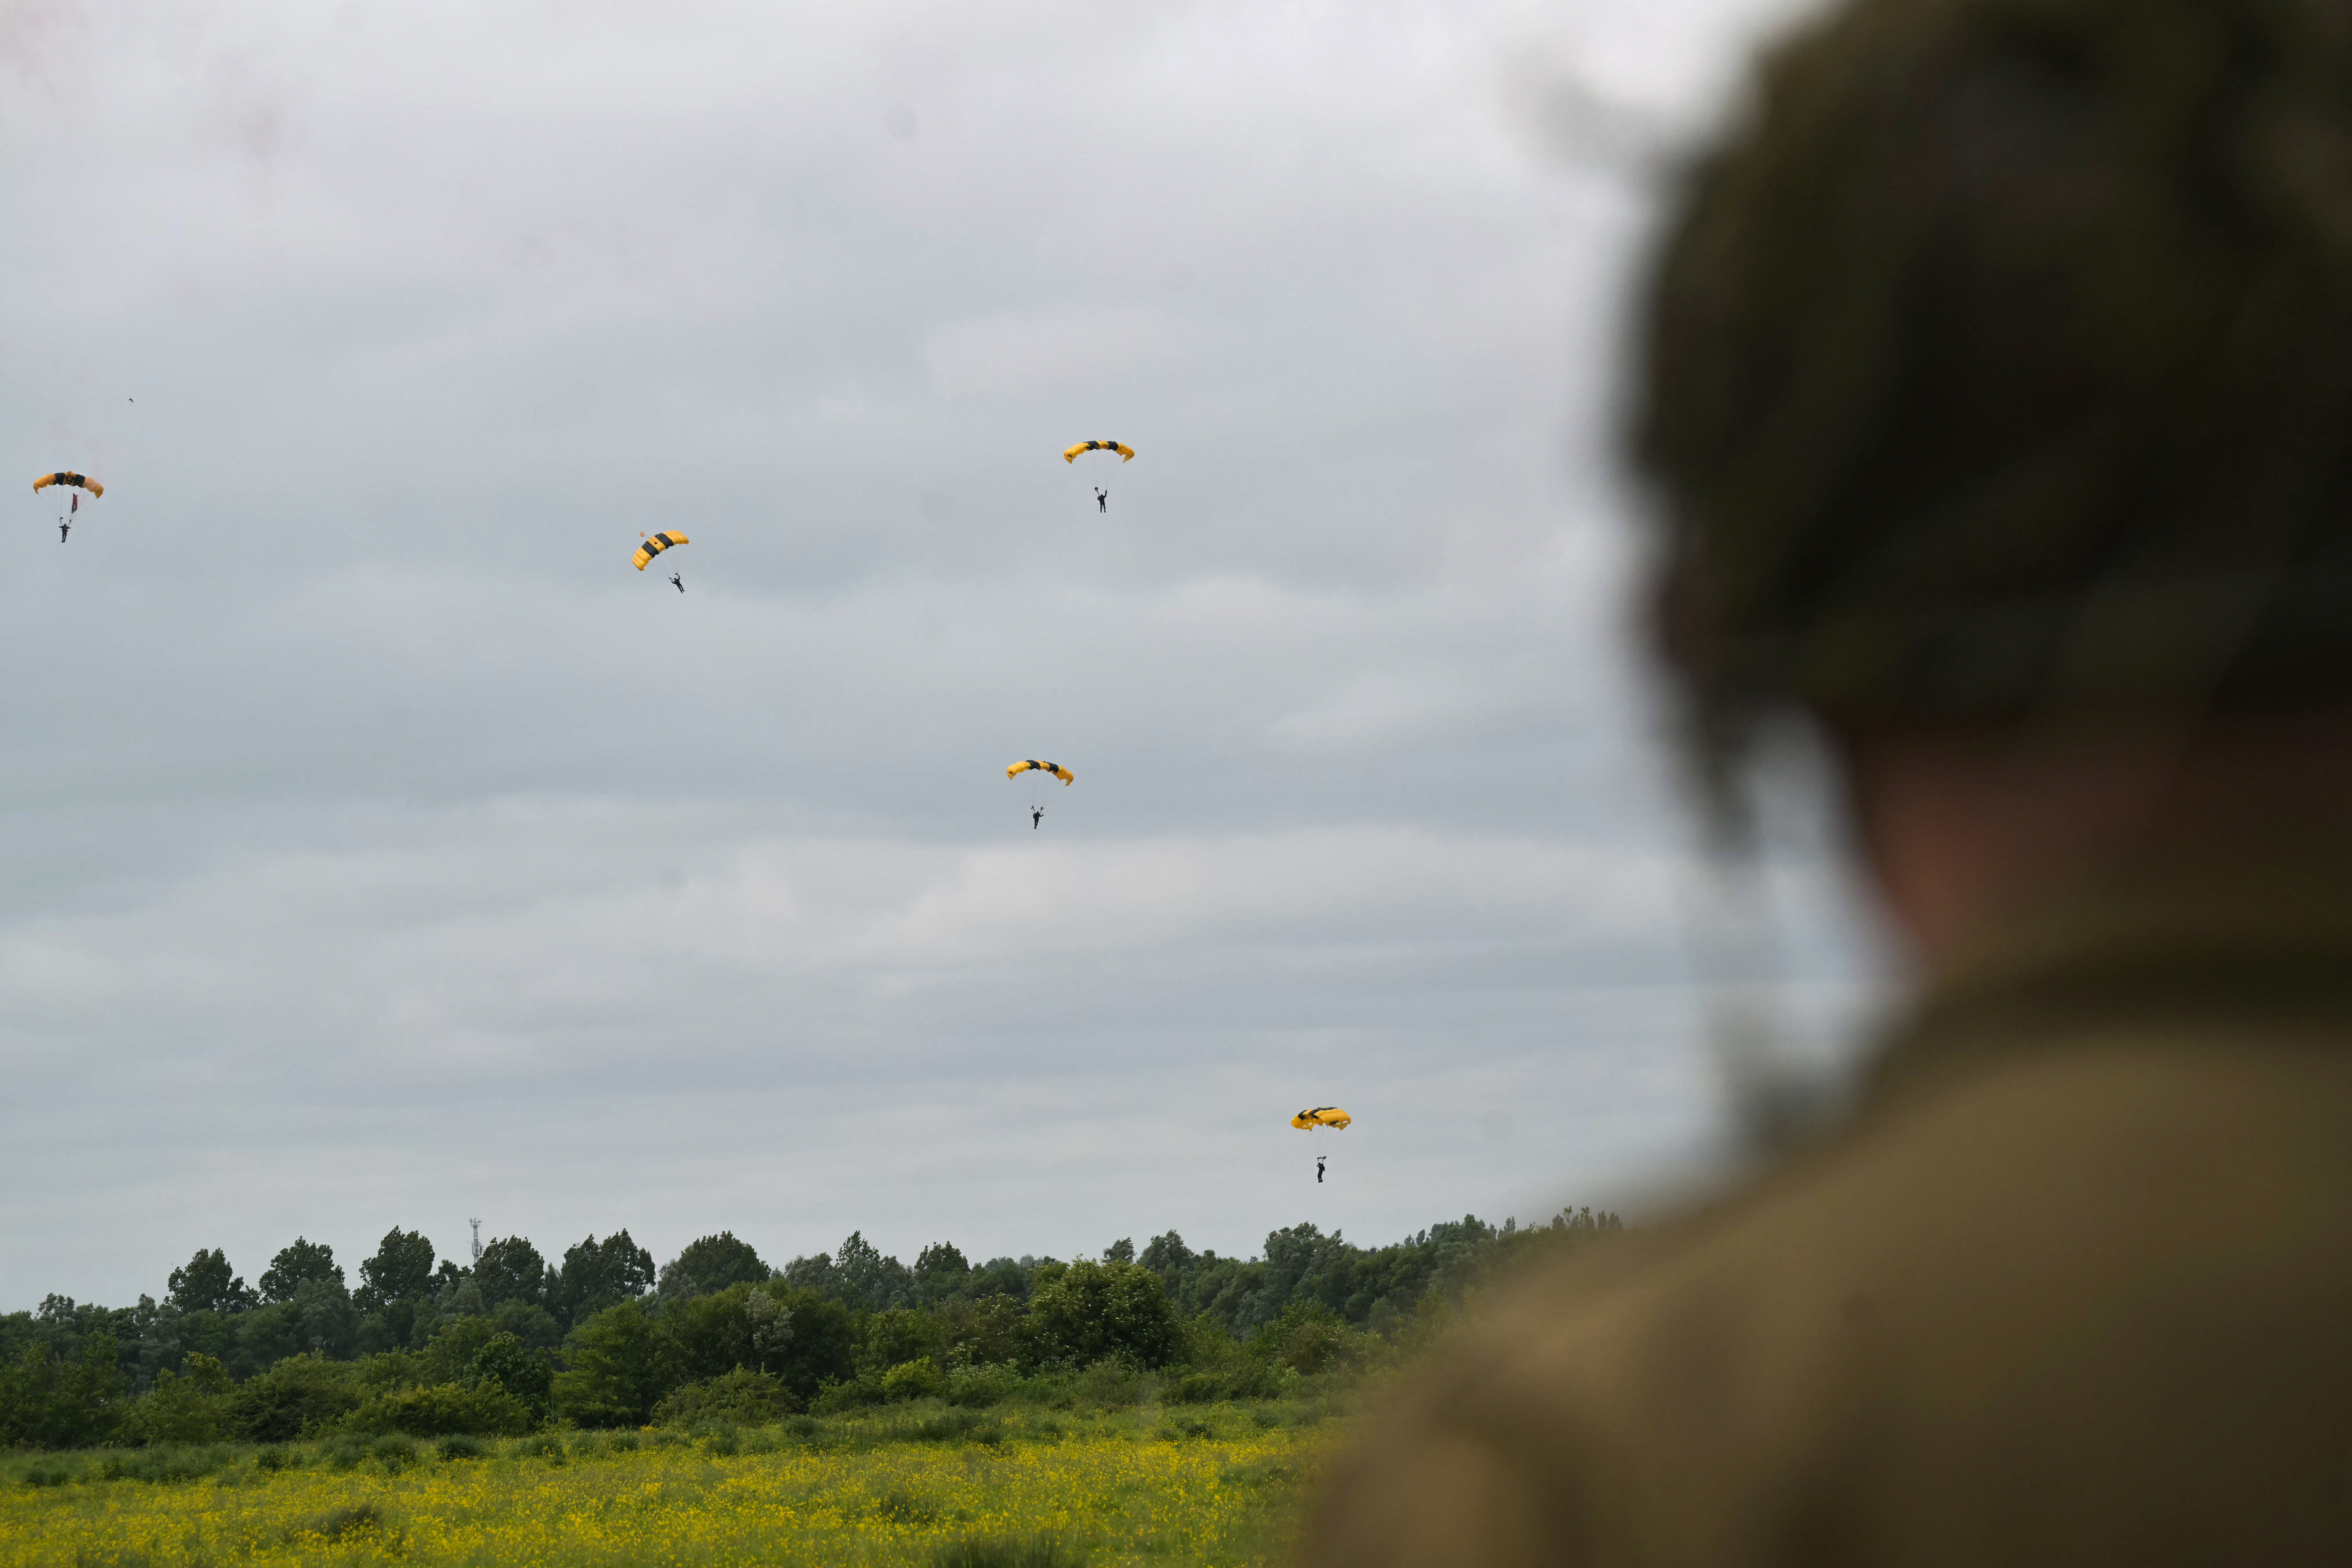 Veterans, civilians parachute over Normandy for D-Day 80th anniversary